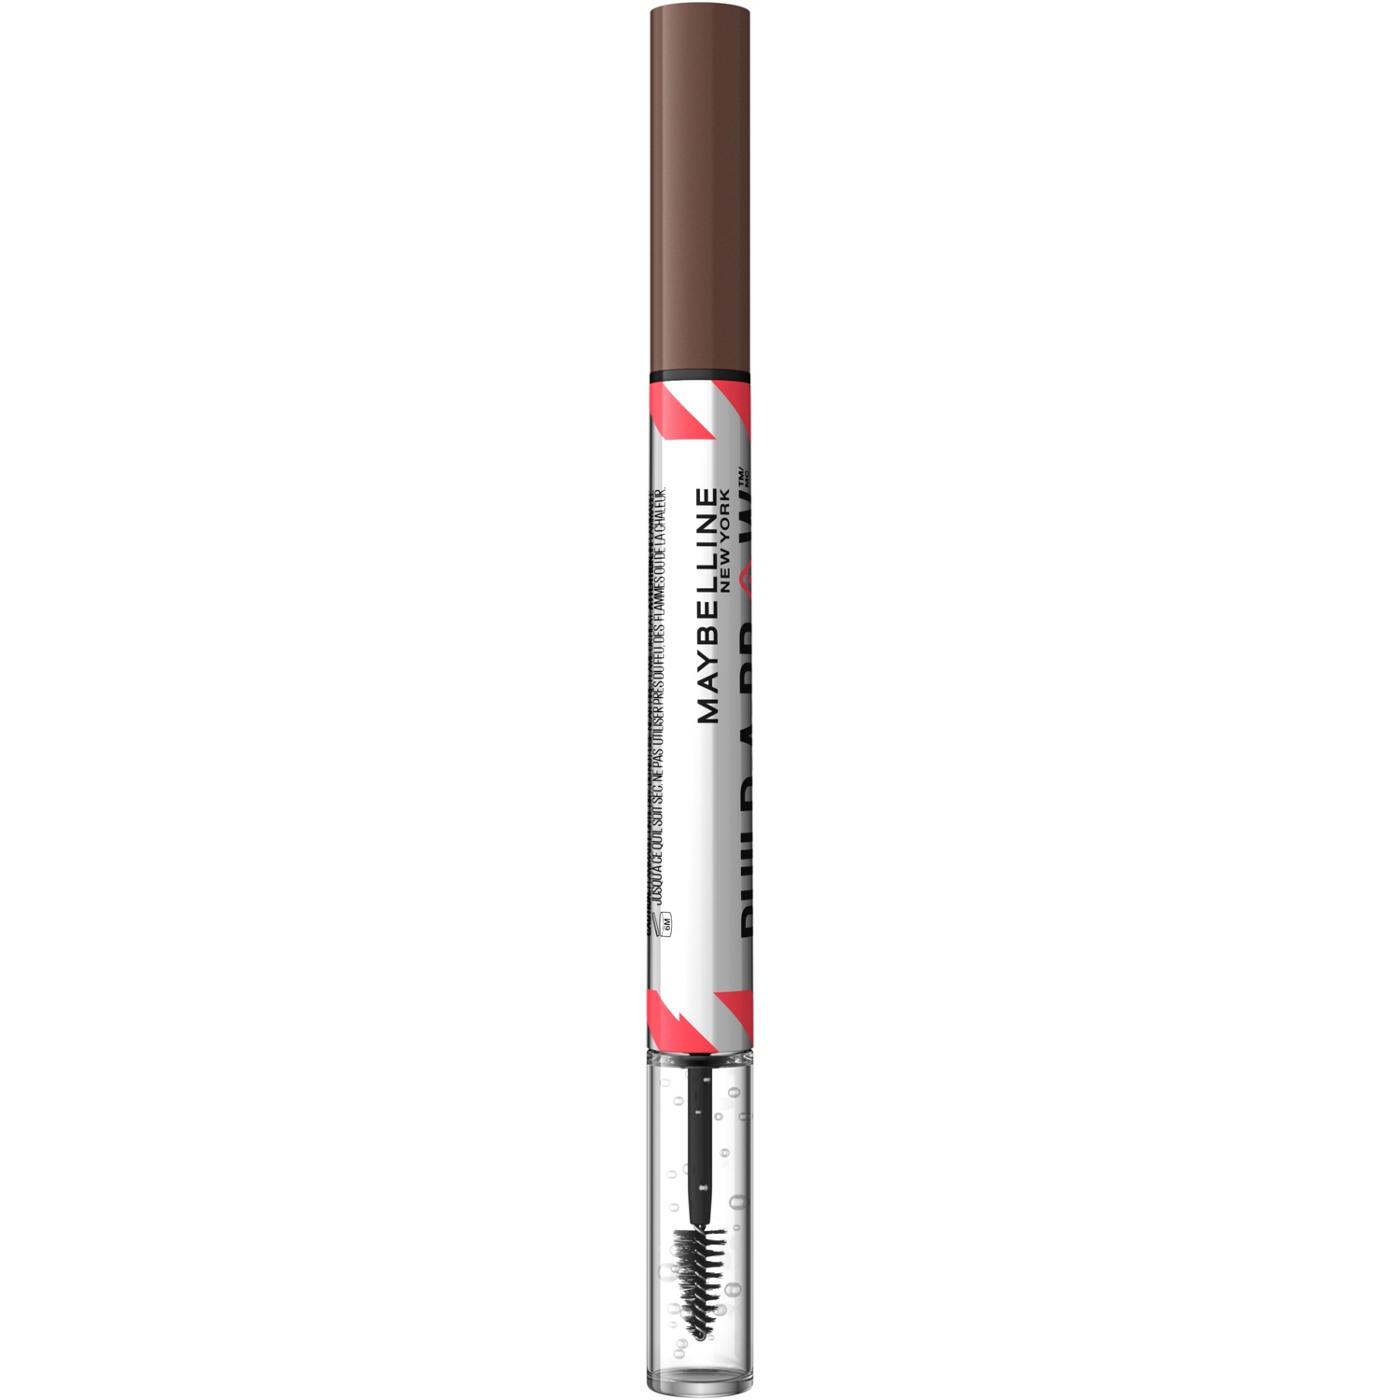 Maybelline Build A Brow 2 In 1 Brow Pen - Medium Brown; image 11 of 16